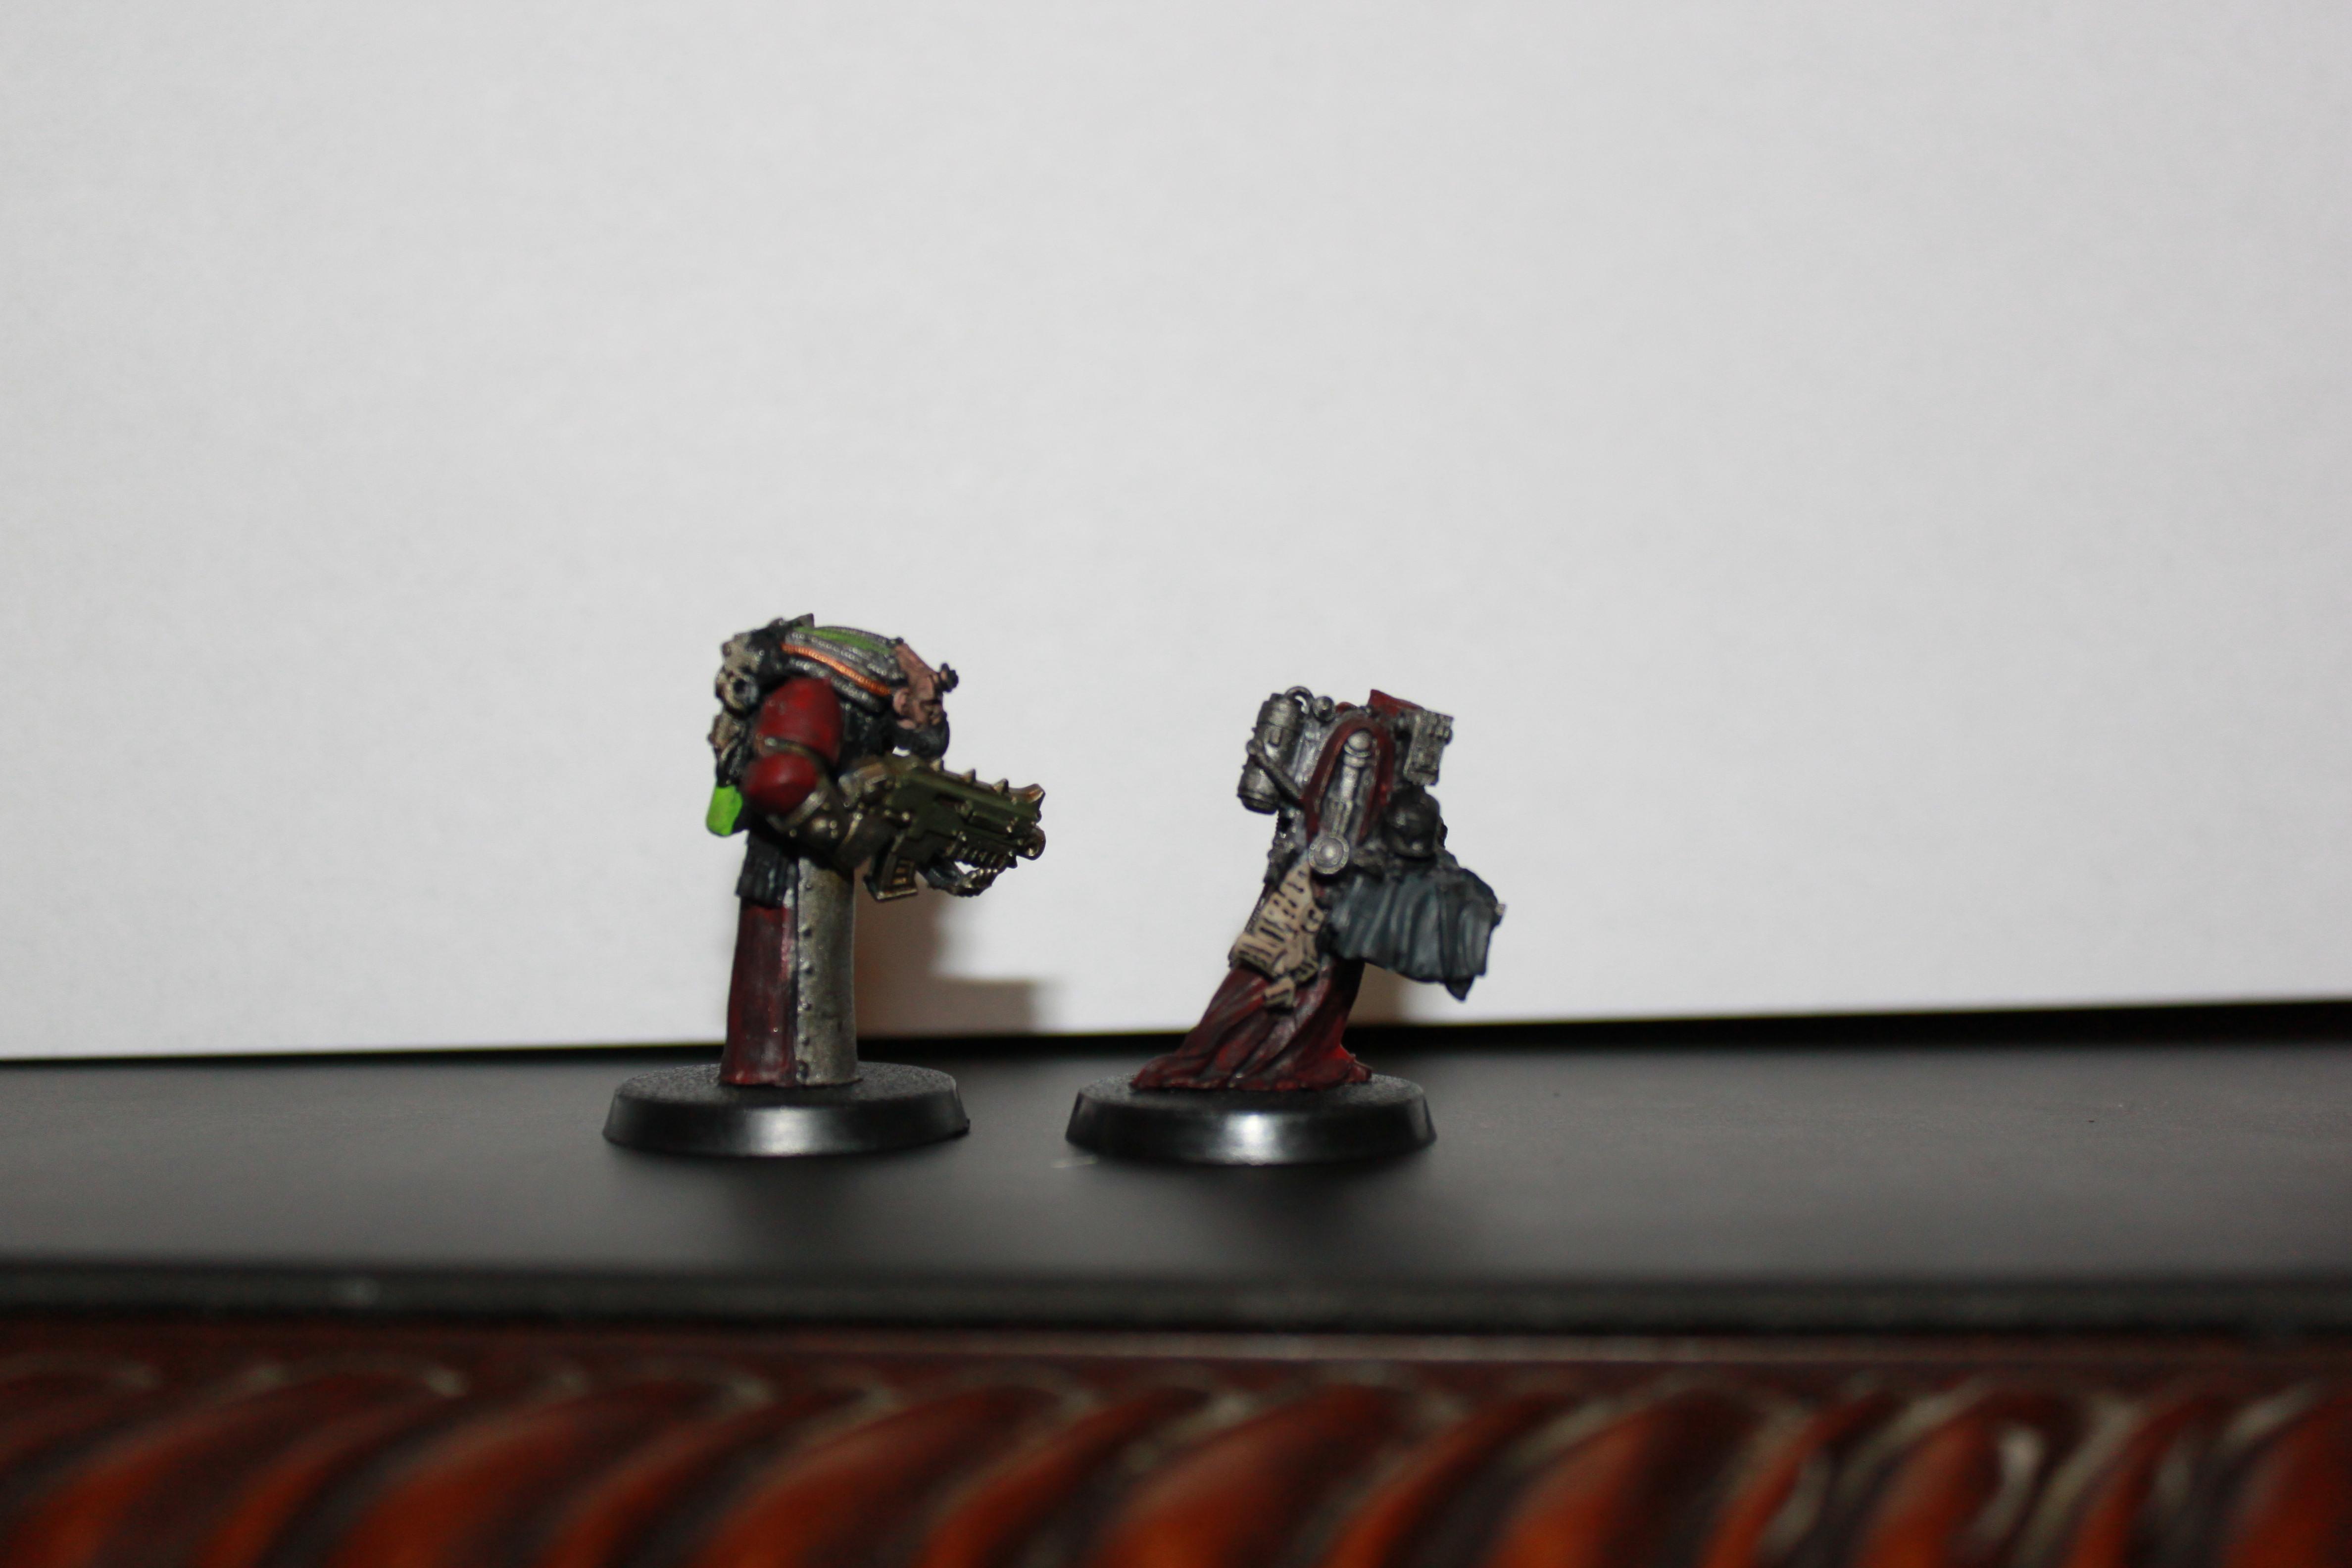 the one on the left is supposed to have claws but I gave him a bolter to ad flavor to the lot